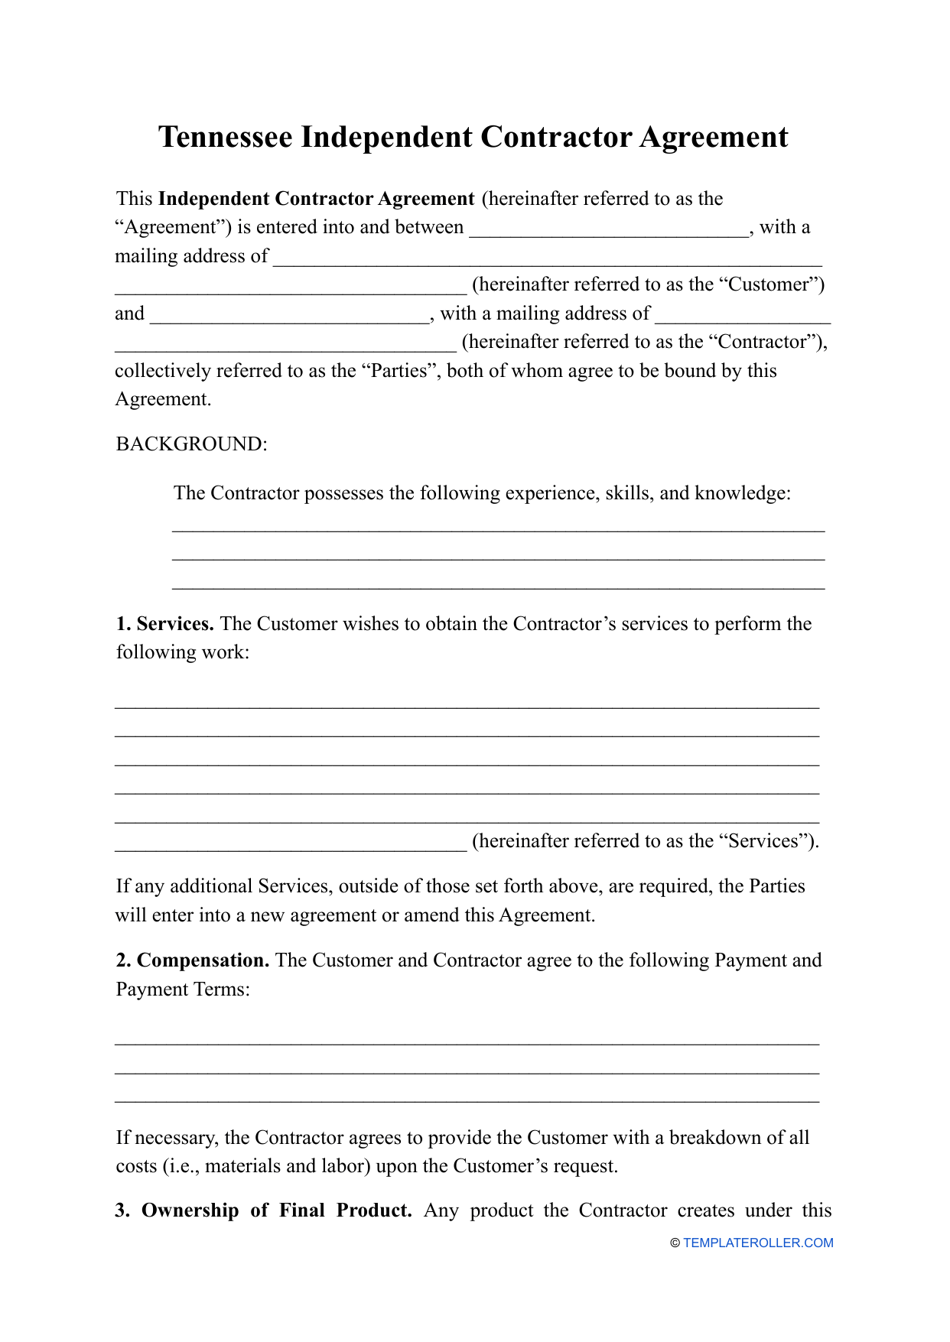 Independent Contractor Agreement Template - Tennessee, Page 1